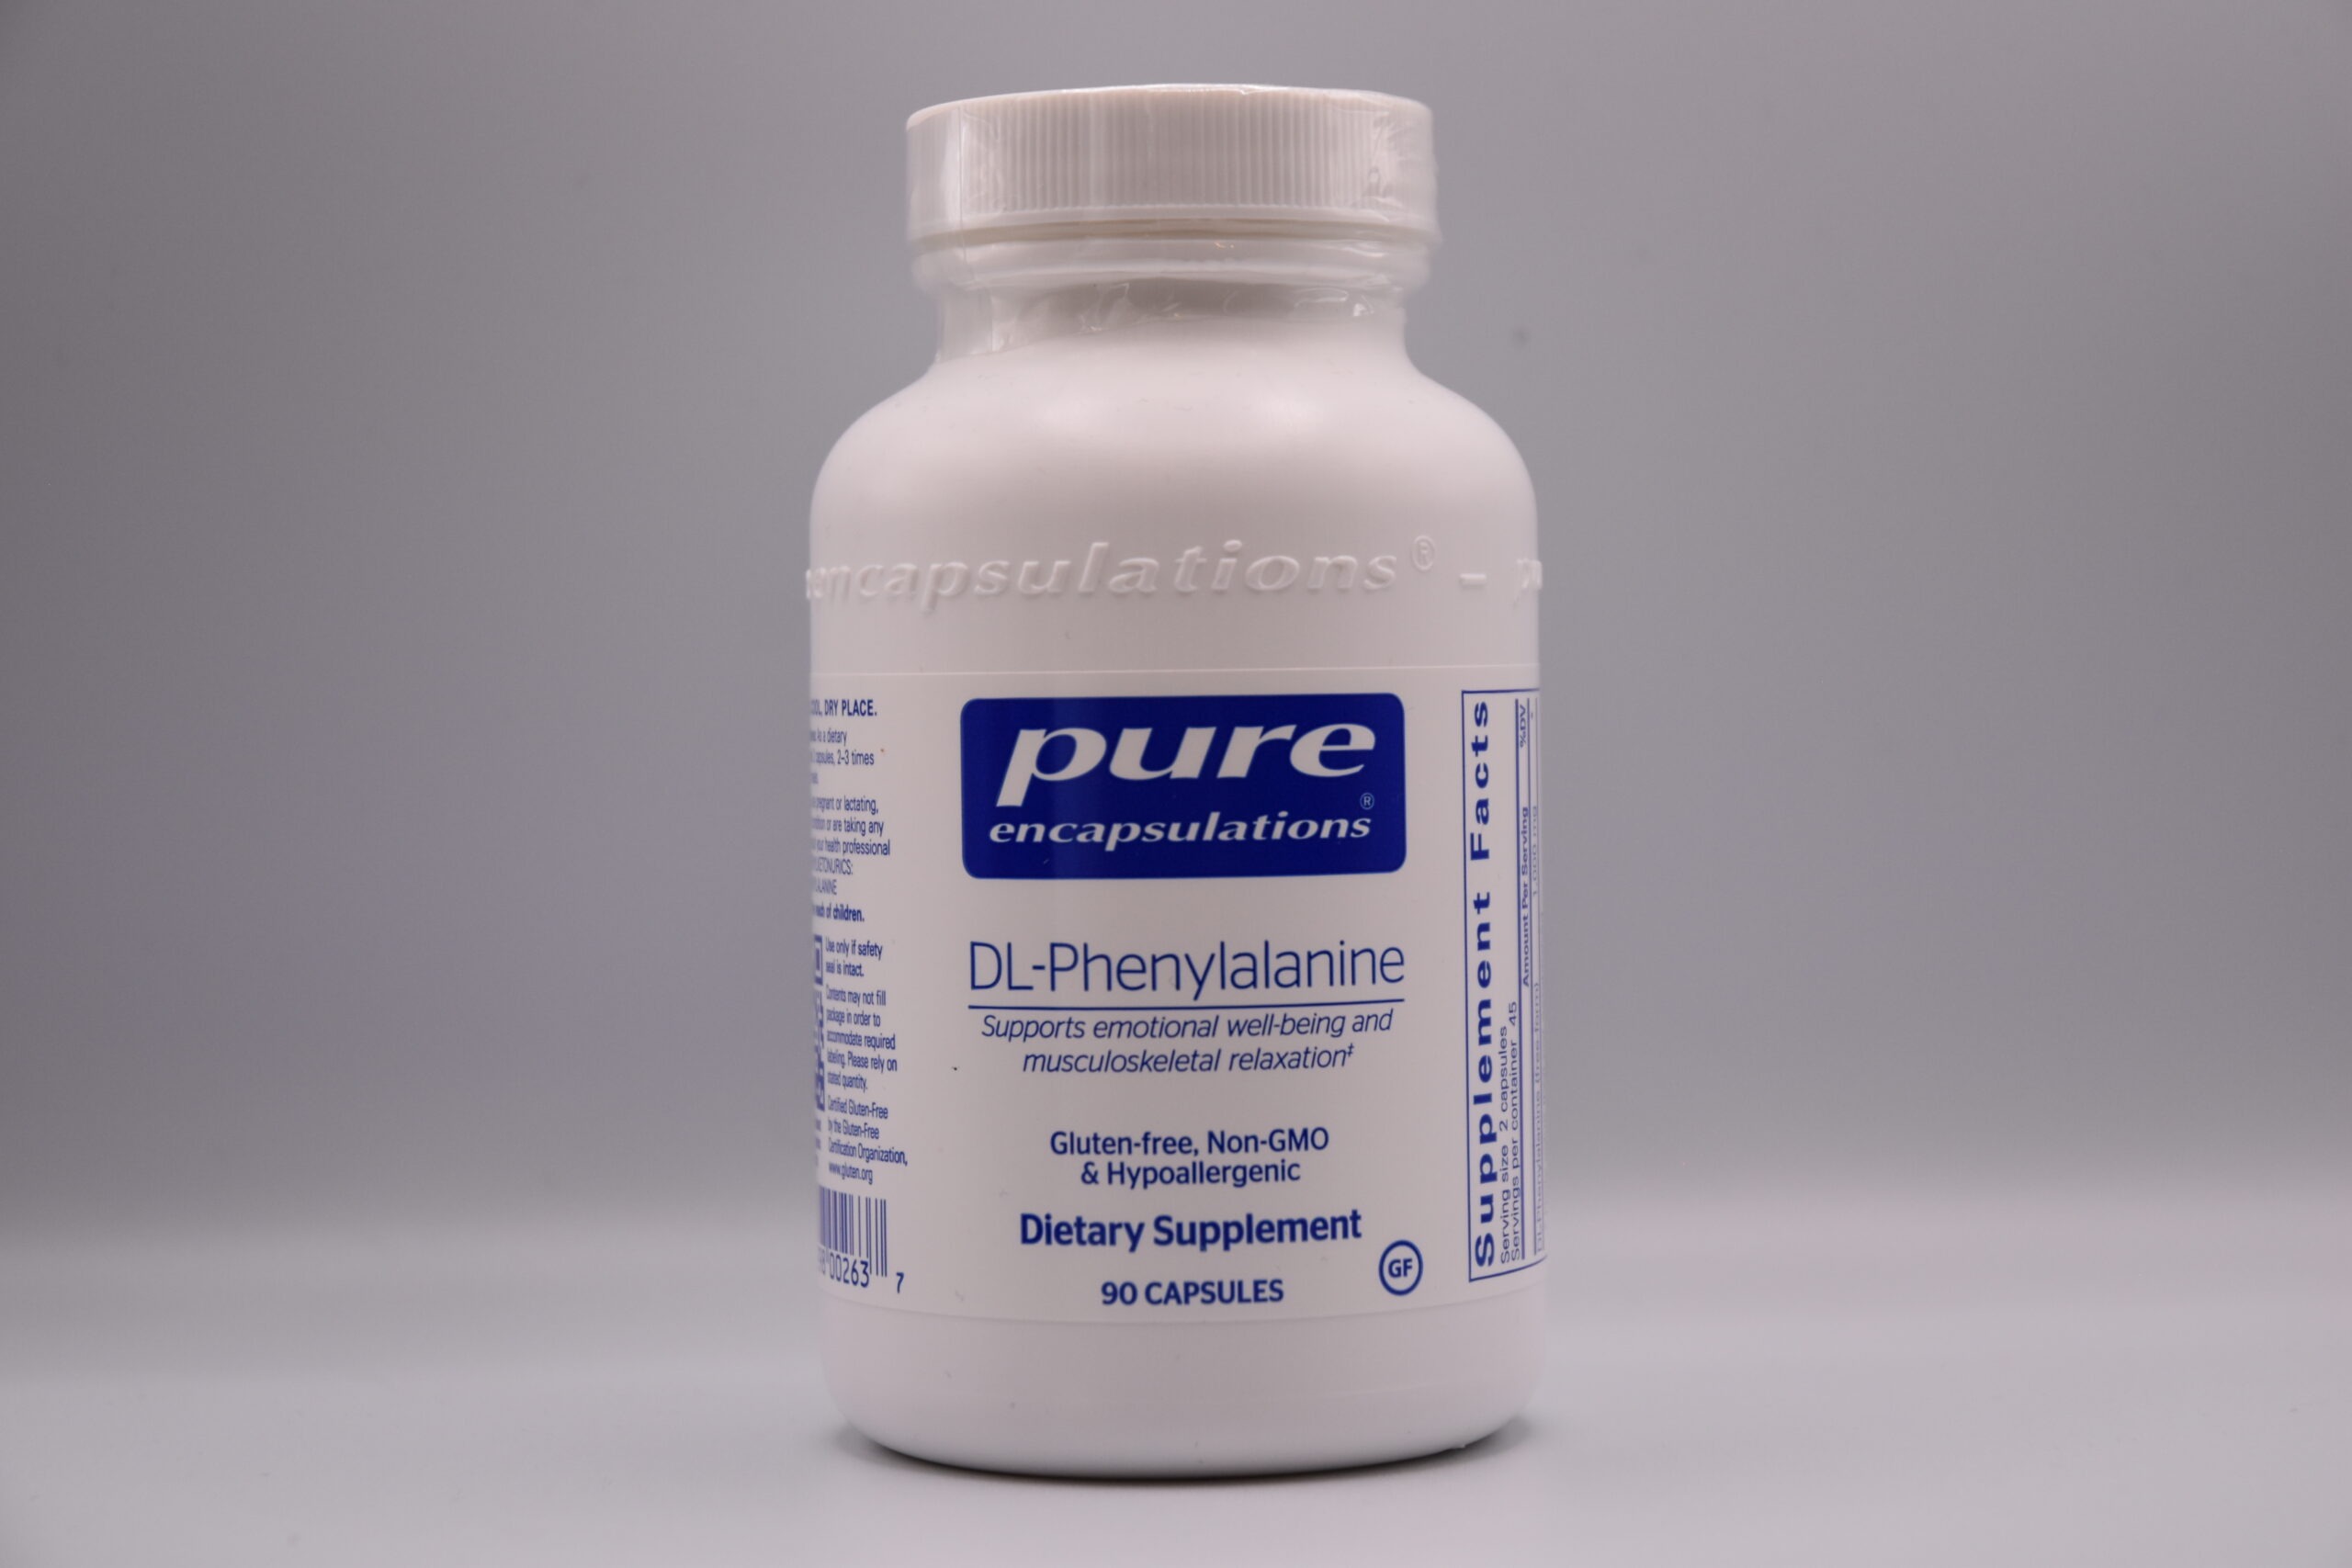 Bottle of DL-Phenylalanine dietary supplement by Pure Encapsulations, stating support for emotional well-being and muscles, with 90 capsules, gluten-free, and non-GMO.